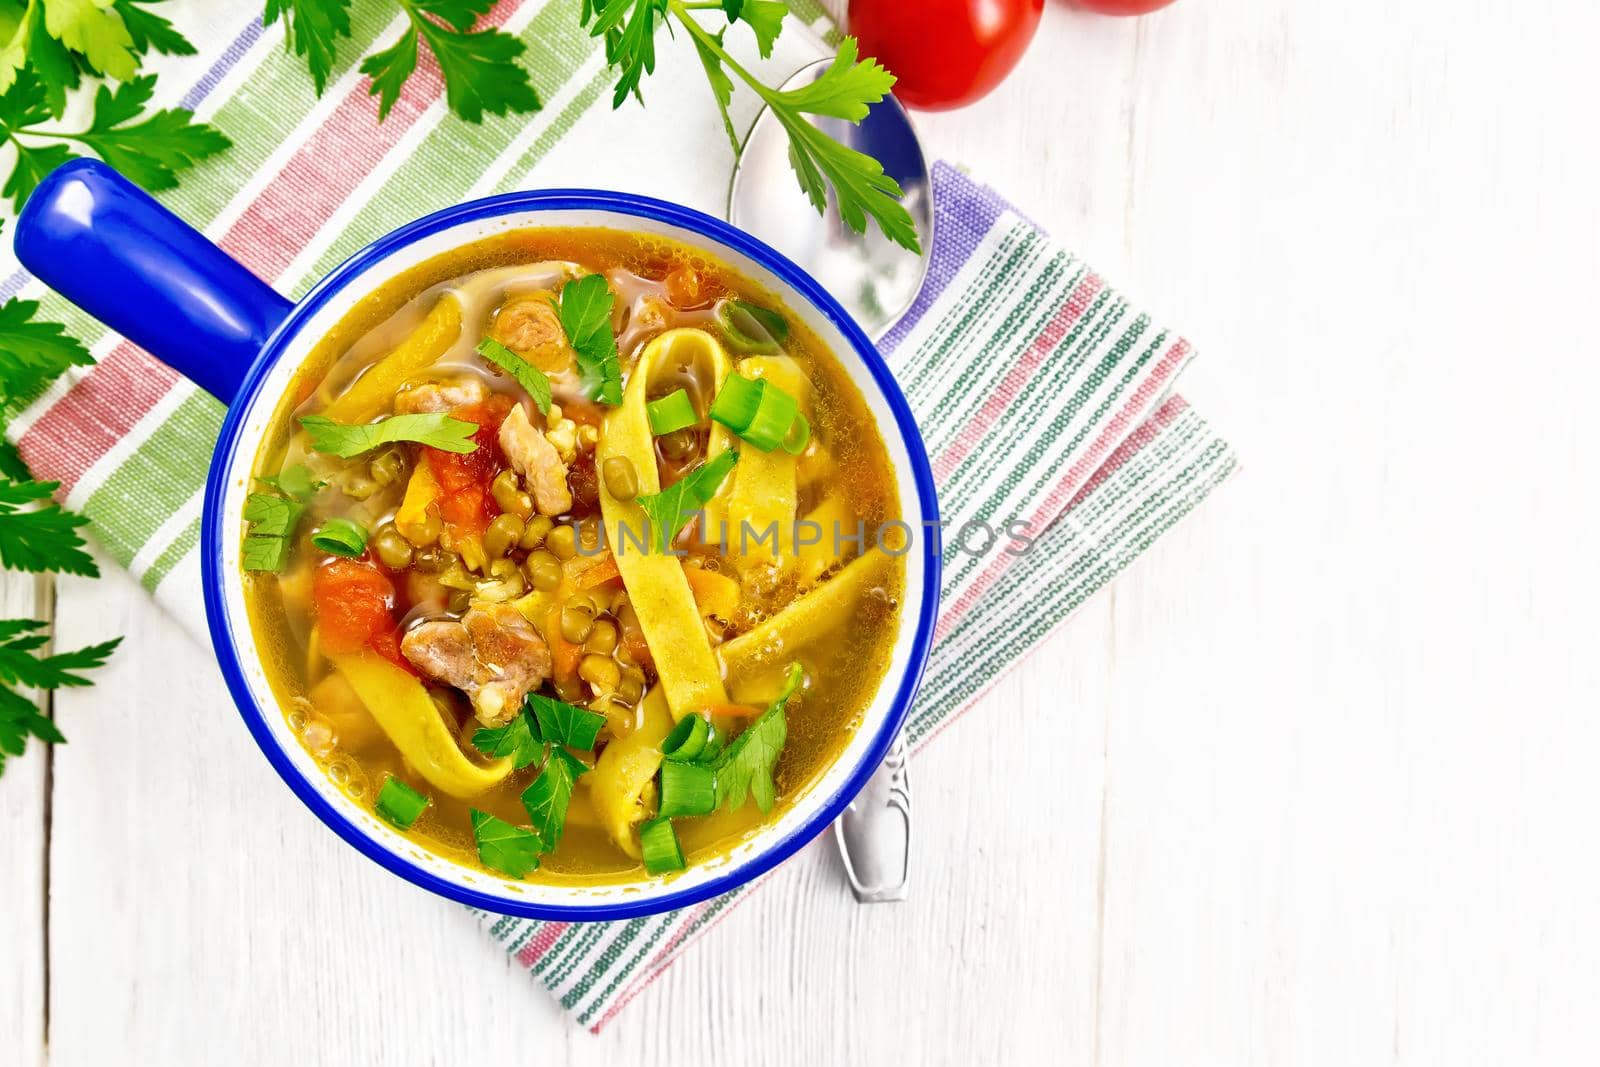 Soup with meat, tomatoes, vegetables, mung bean lentils and noodles in a blue bowl on a towel, parsley and spoon on wooden board background from above